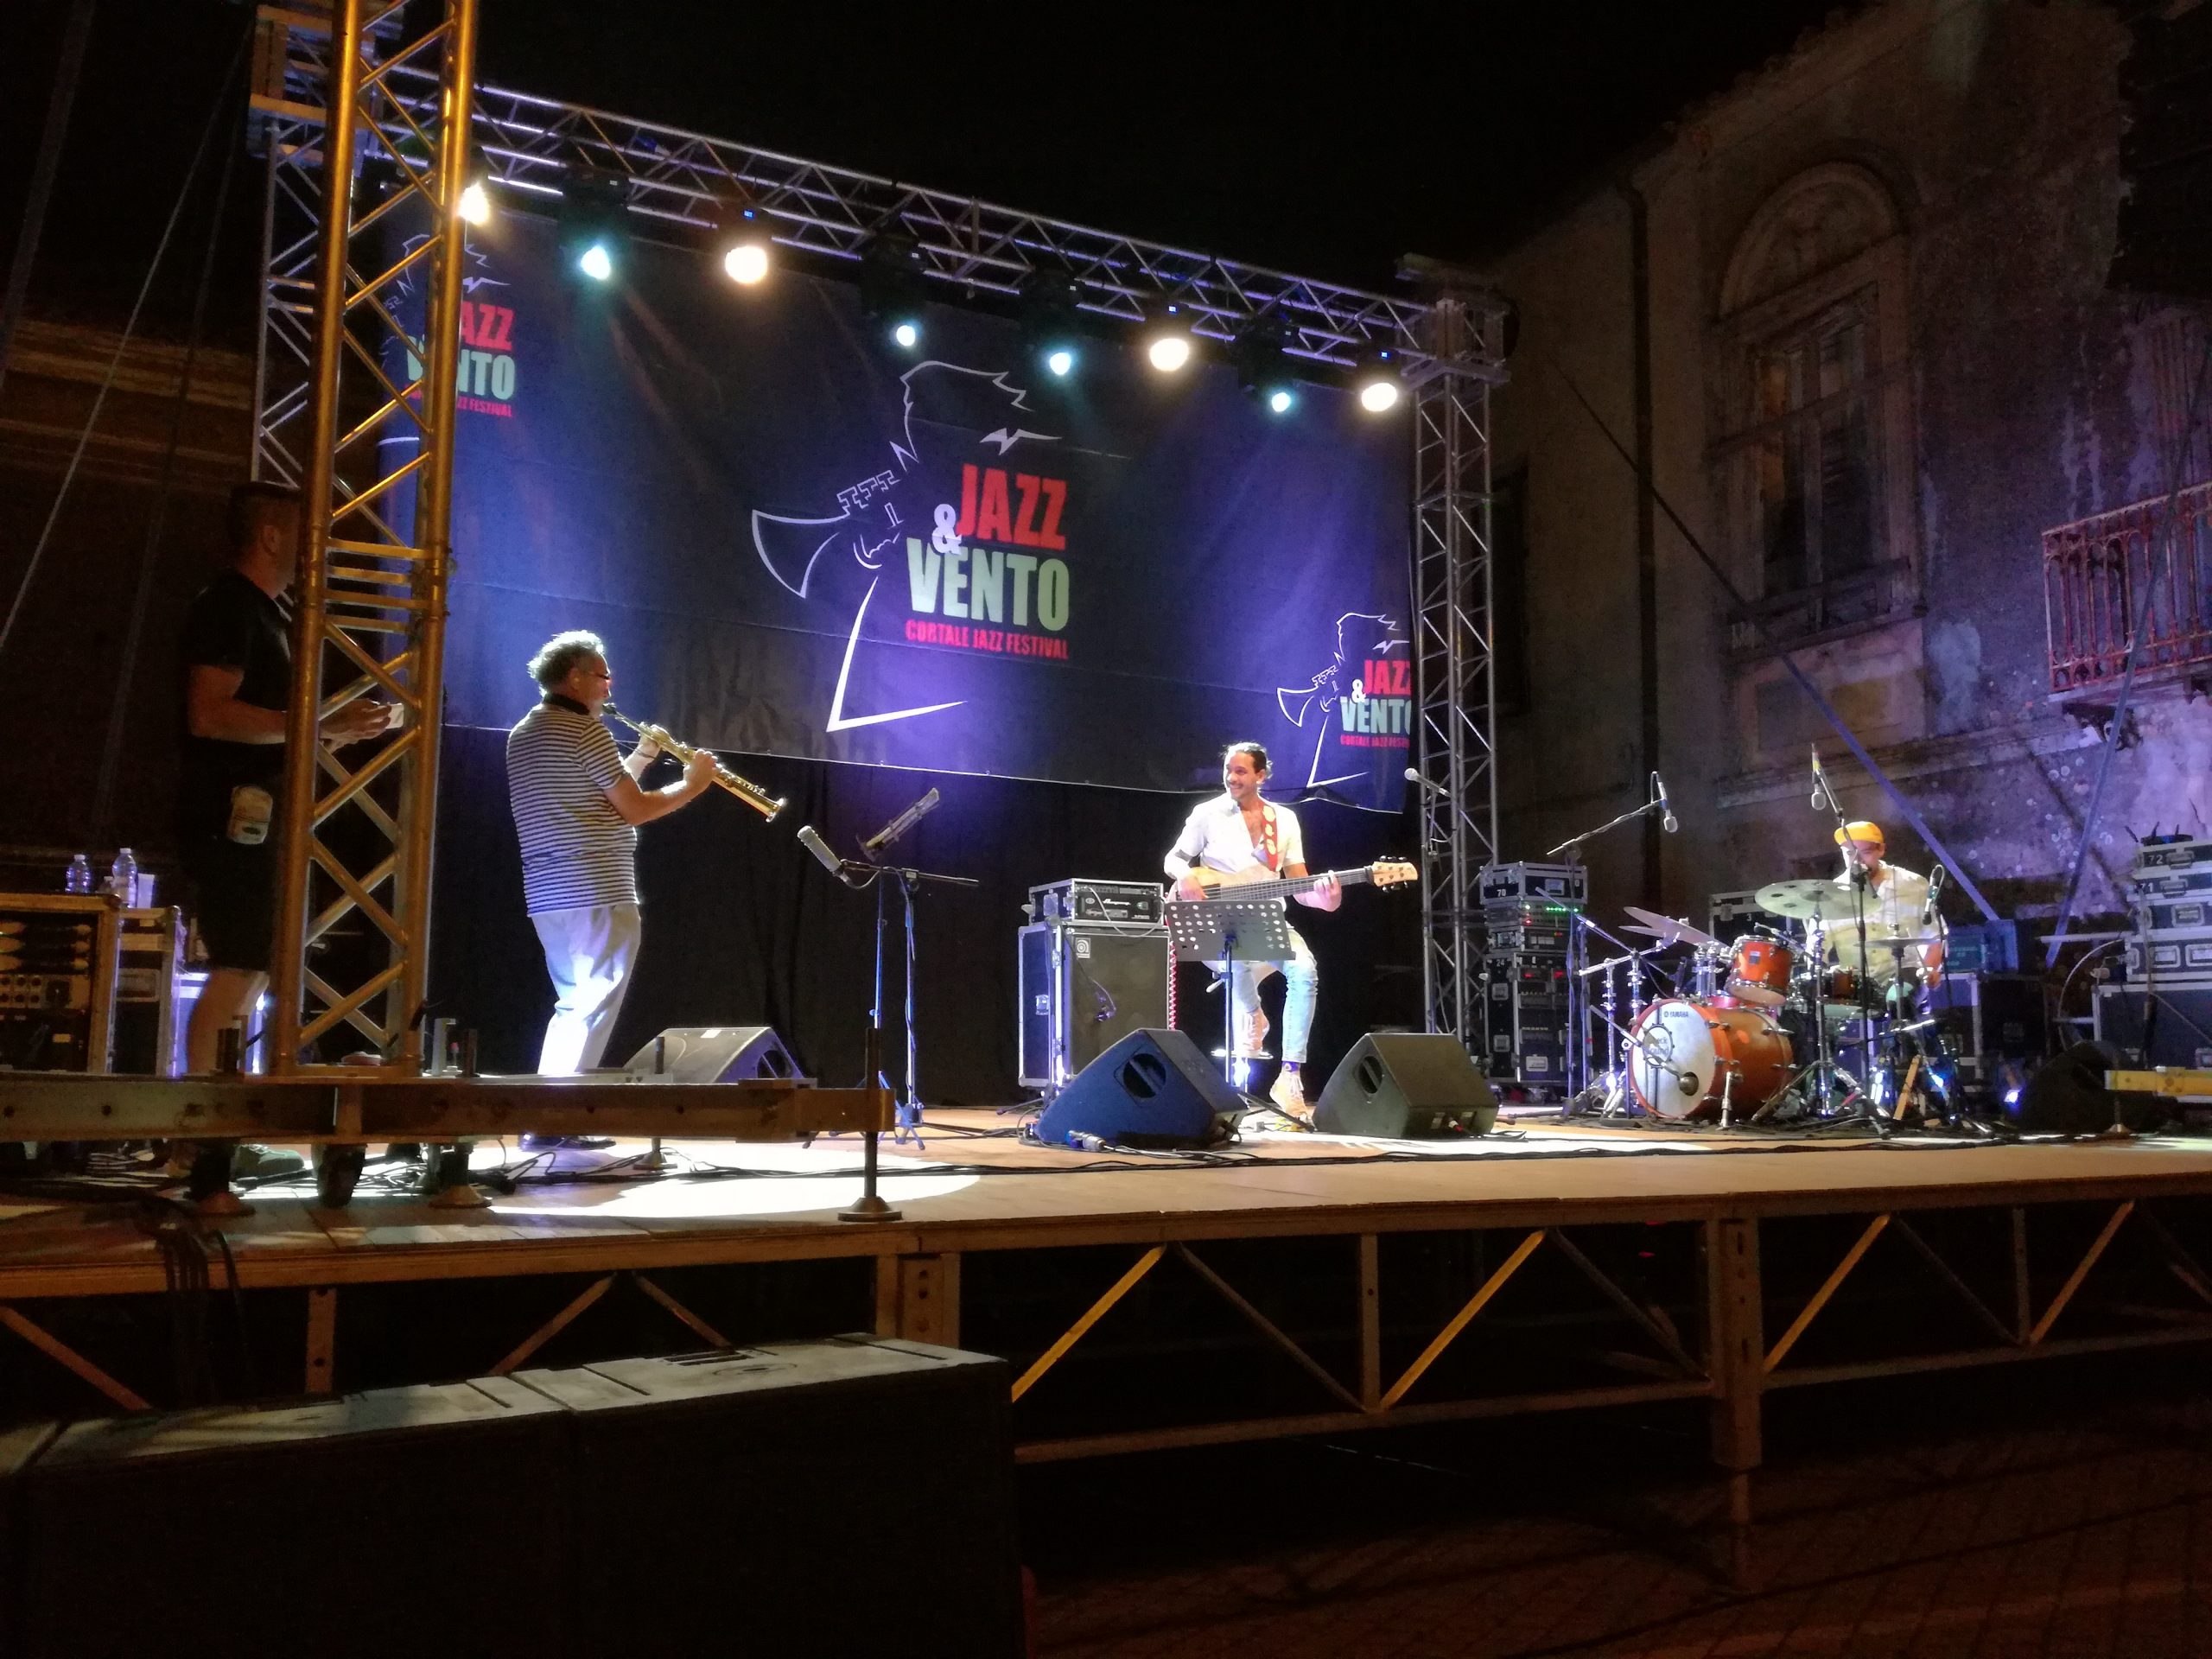 "Reza" (Jaco Pastorius, 1983) performed by the Through Jaco Legacy Trio at the Jazz&Vento festival in Cortale (CZ), Italy.